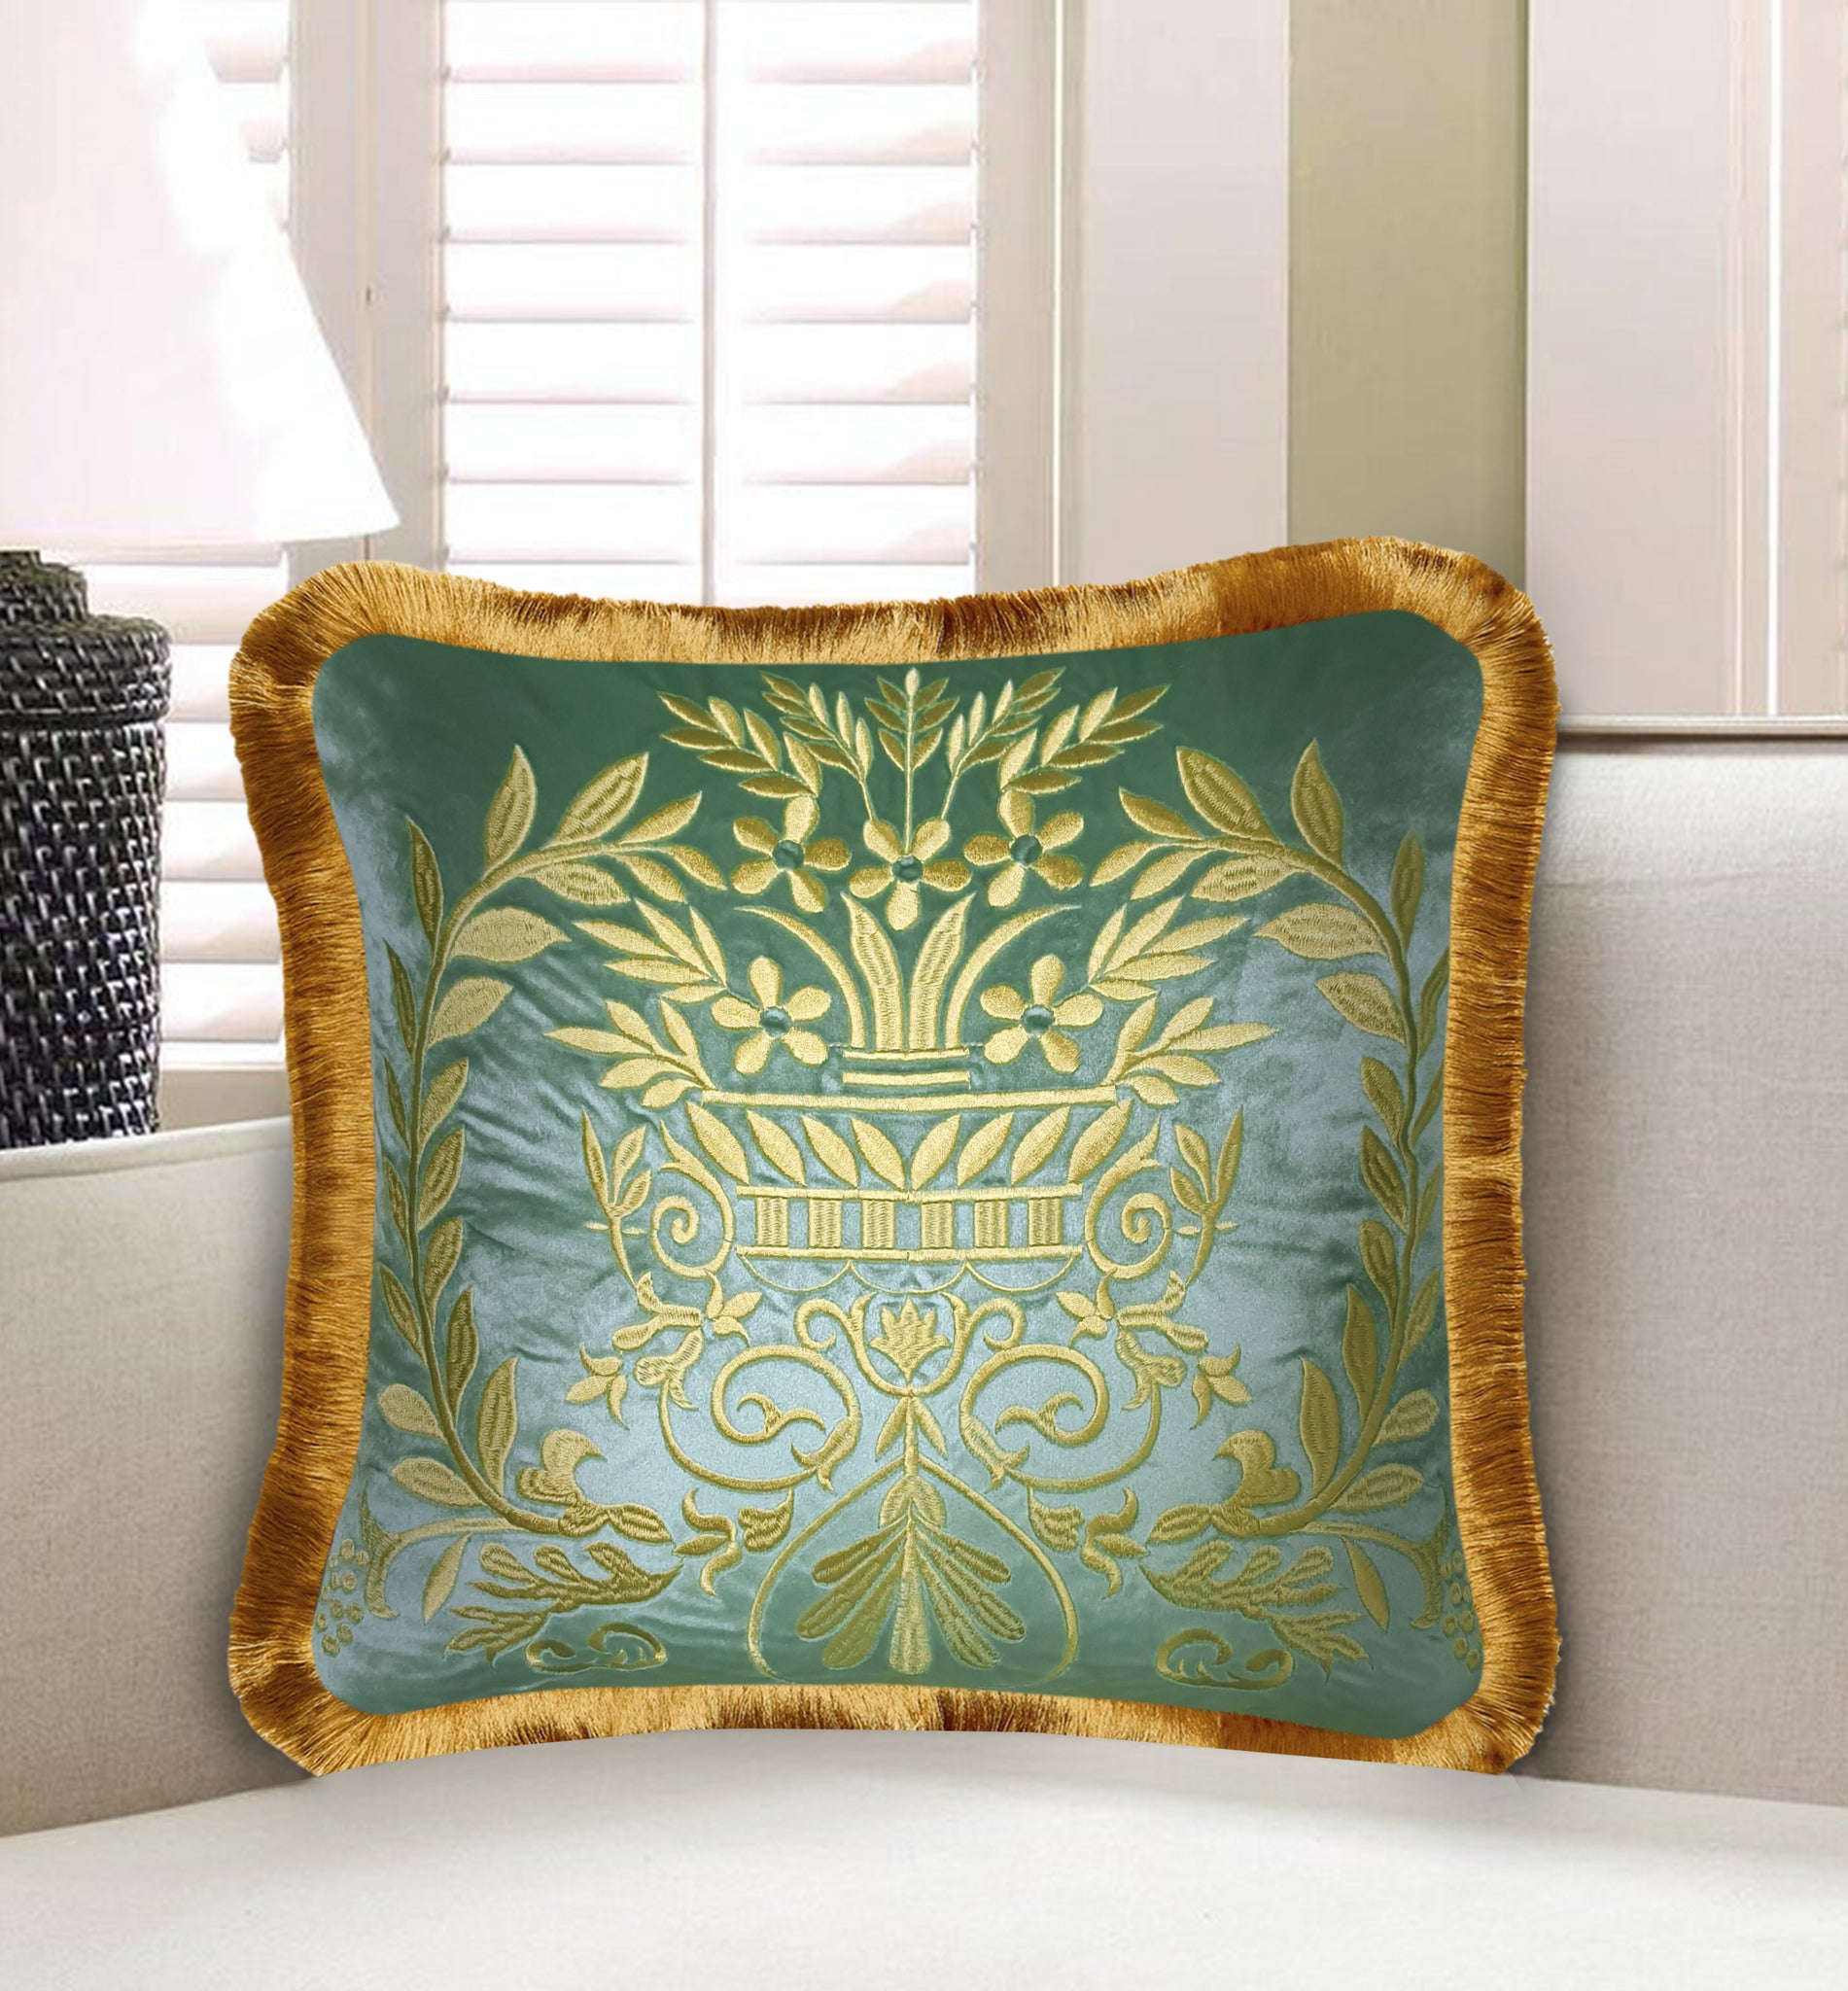 Velvet Cushion Cover Embroidery Iconic Baroque Motif Decorative Pillow European Style Home Decor Throw Pillow for Sofa 45x45 cm 18x18 In